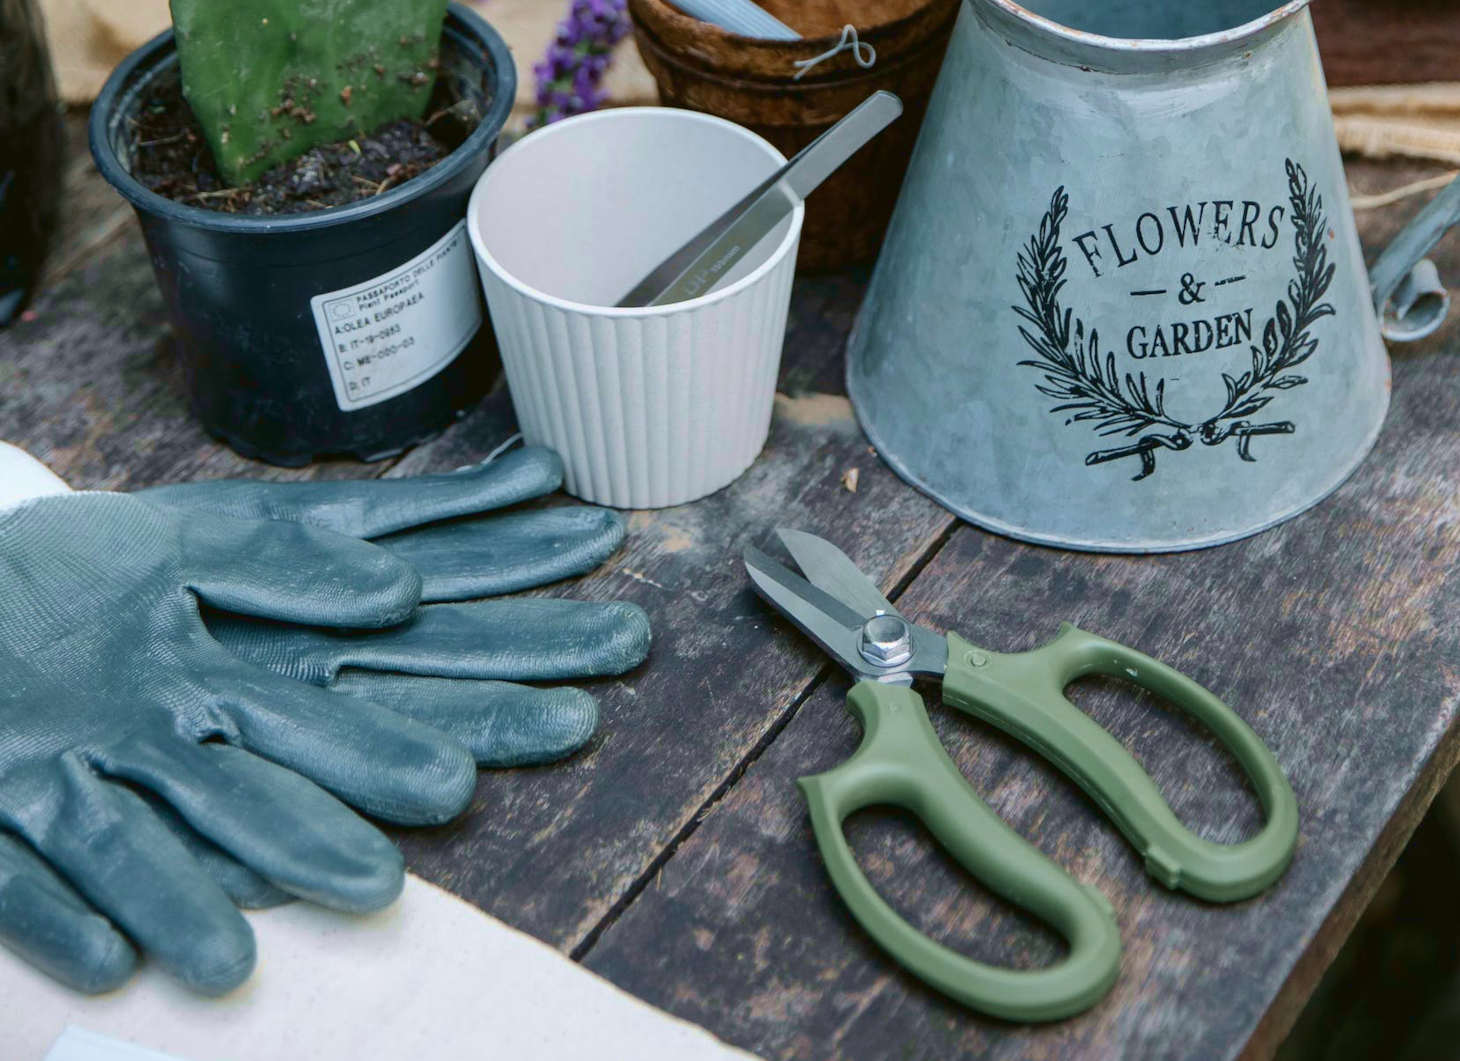 pruning scissors and other gardening tools